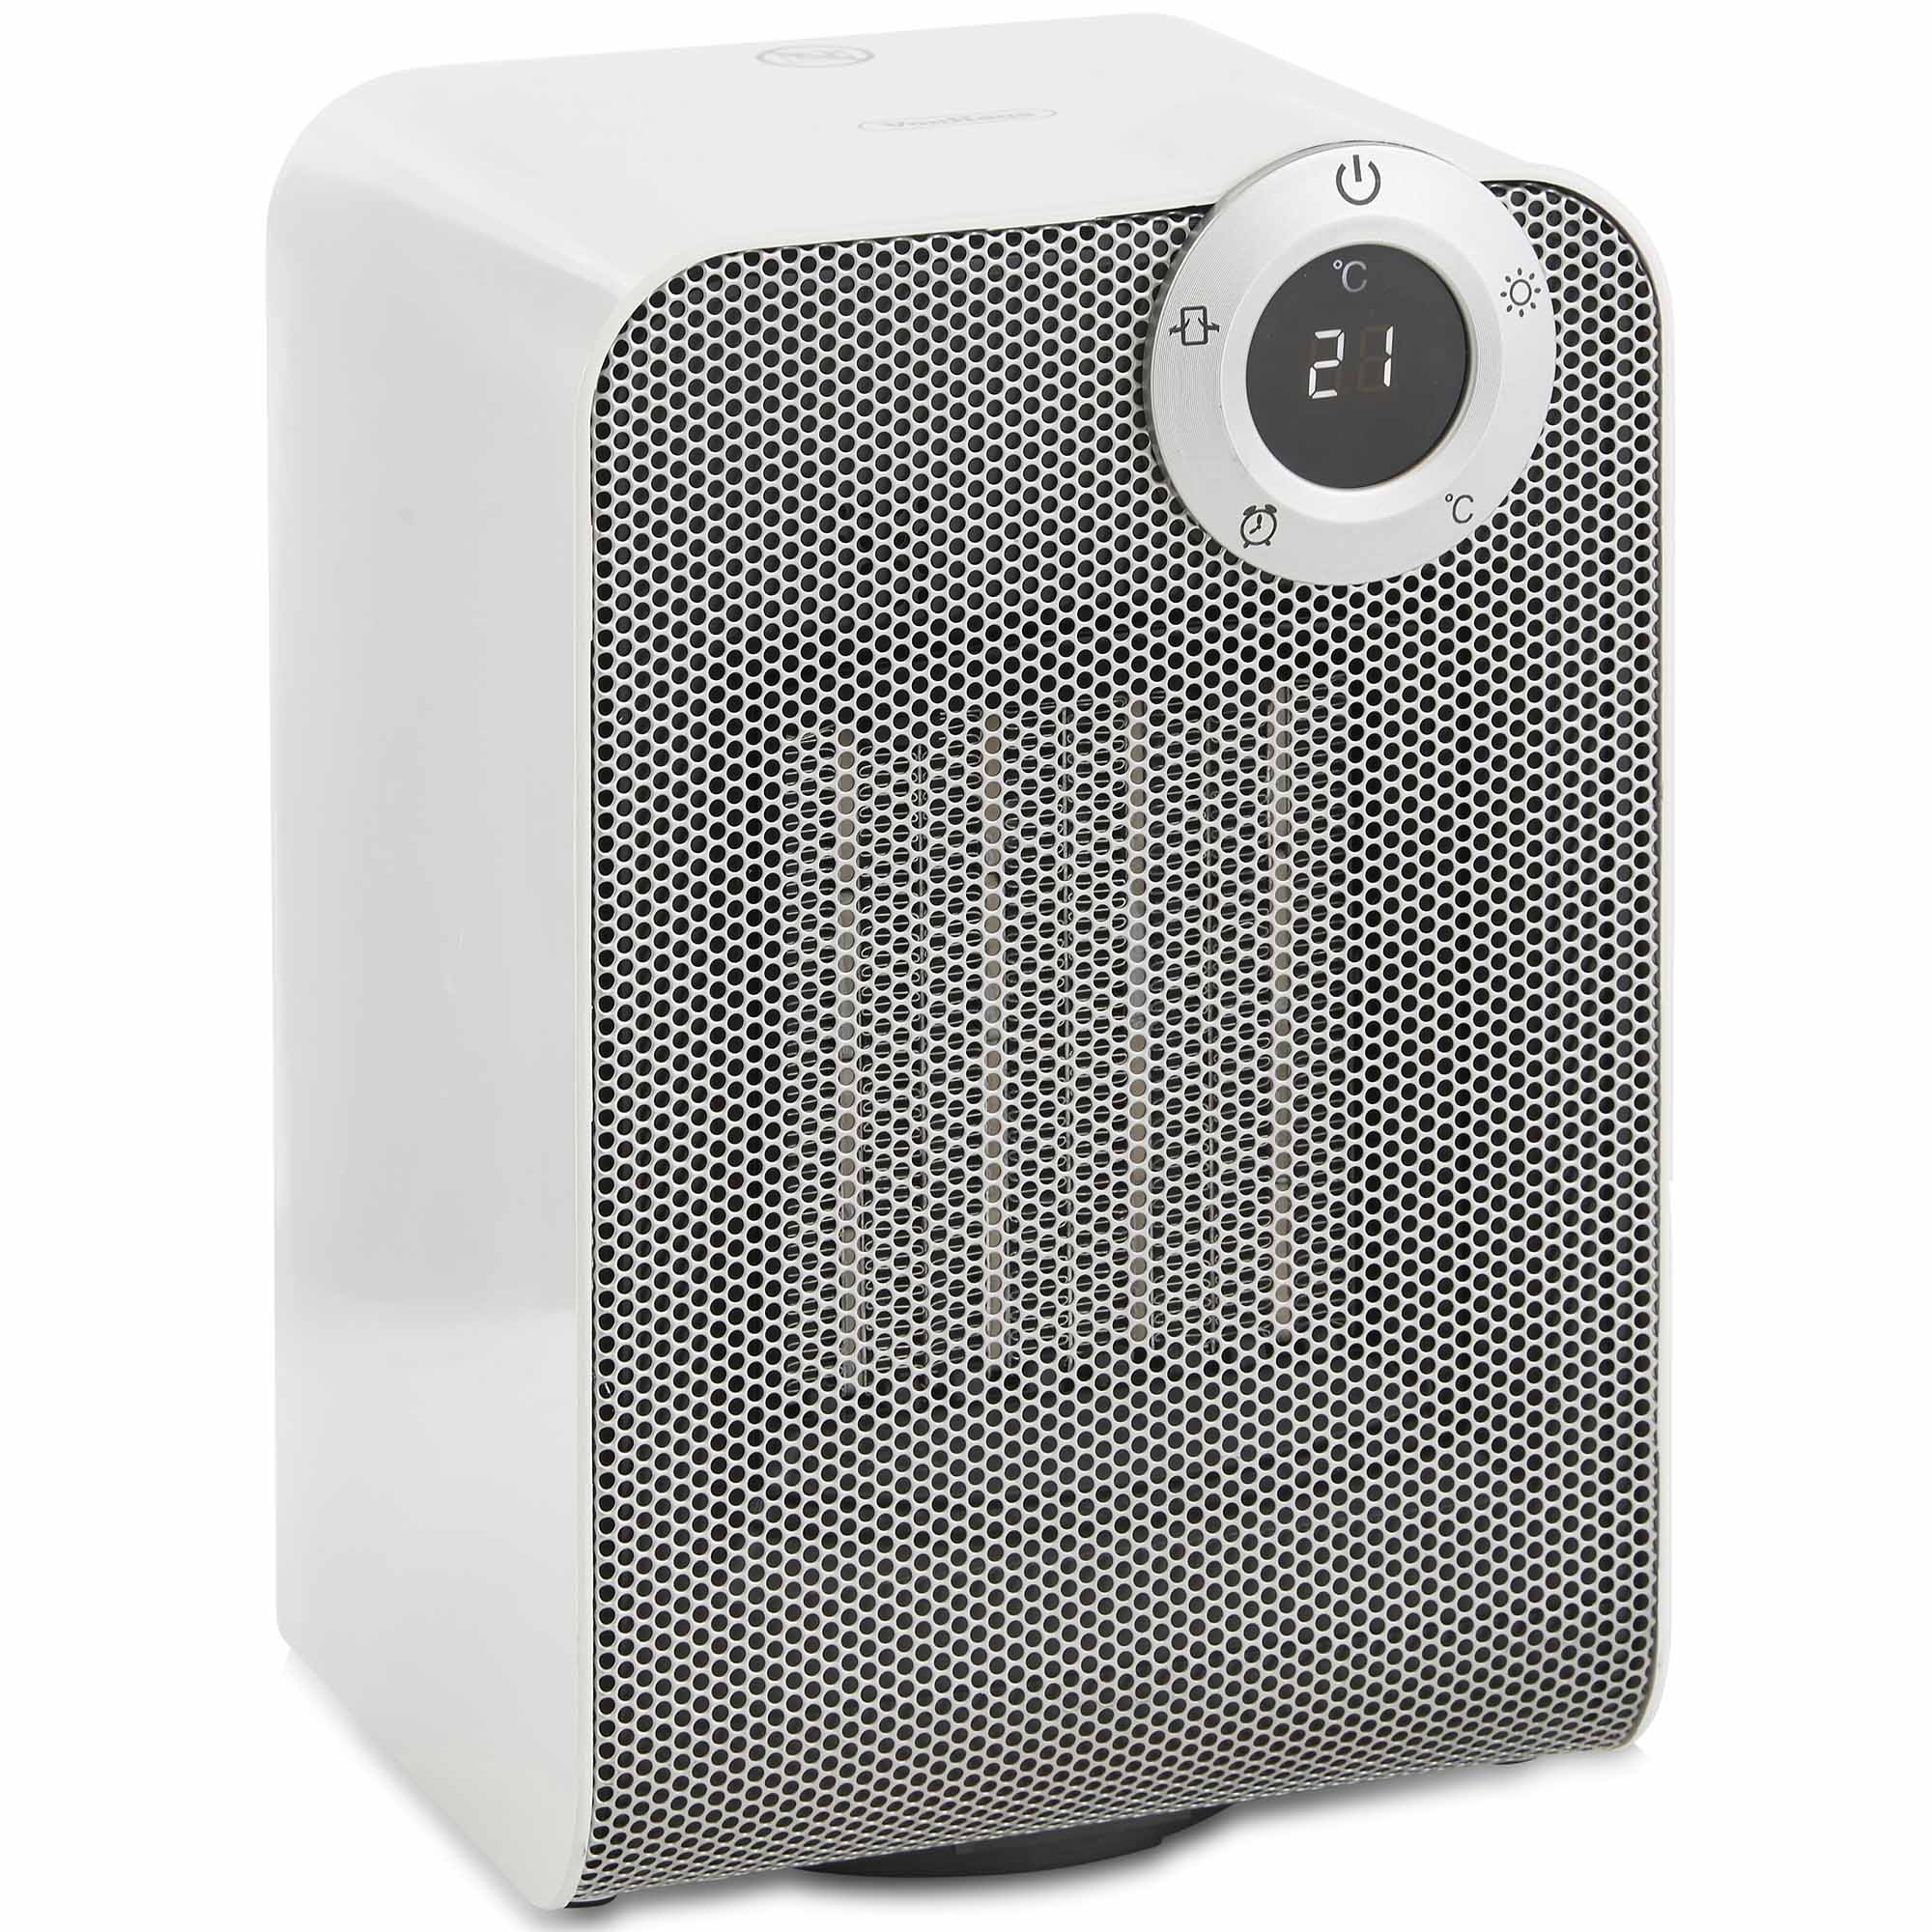 Details About Vonhaus 1800w Oscillating Fan Heater Ceramic Ptc Heat With Timer Lowhigh throughout measurements 2000 X 2000